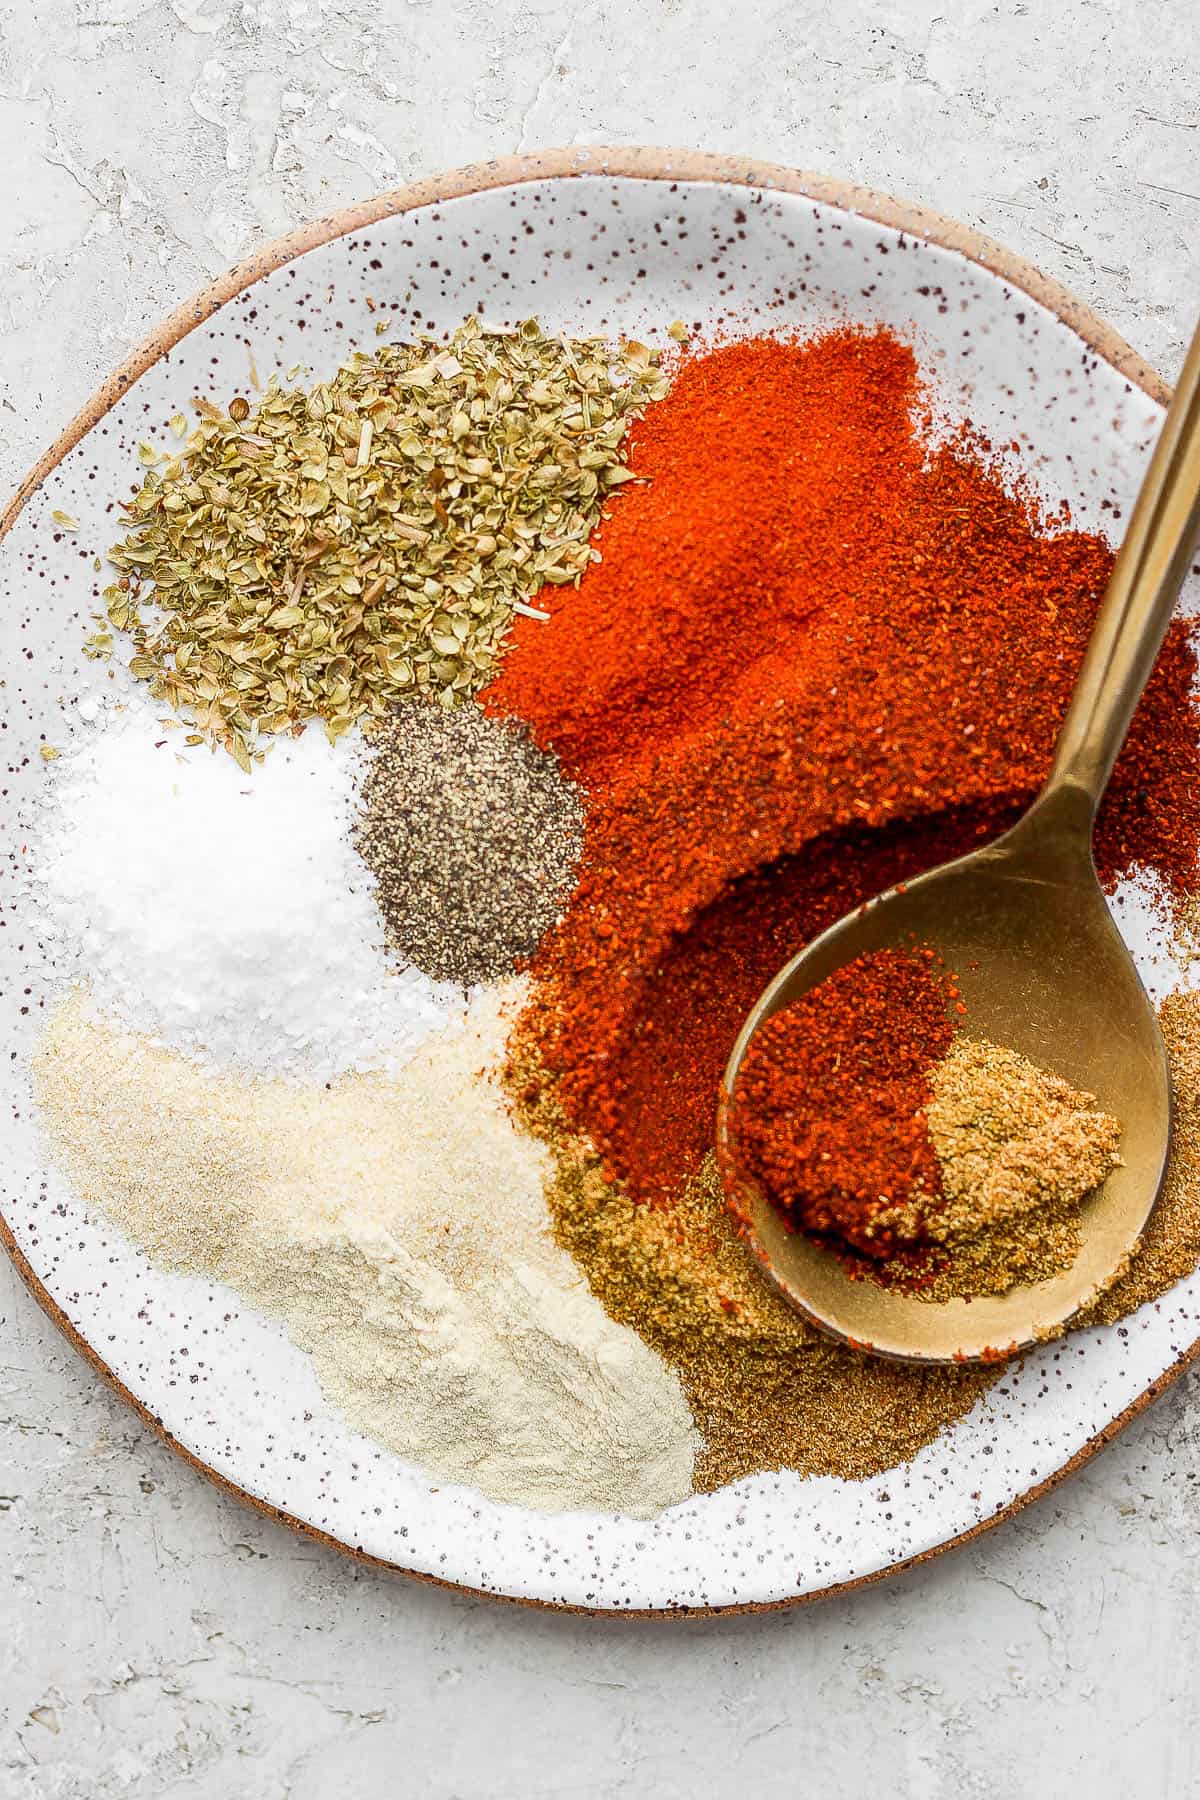 Fajita seasoning ingredients in a shallow bowl with a golden spoon.